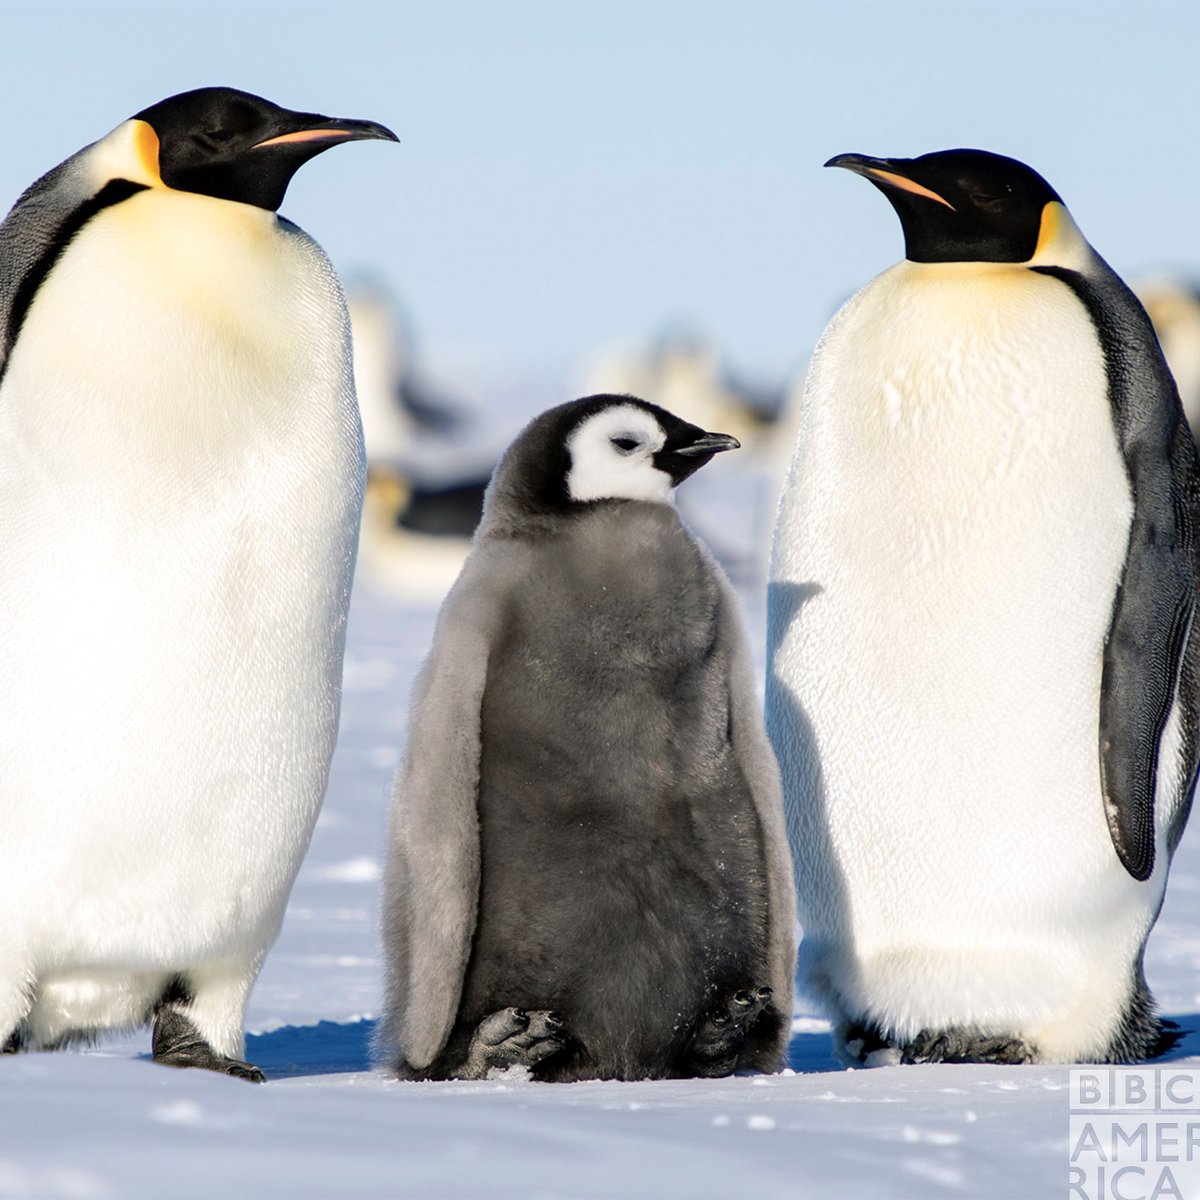 Emperor penguins can dive to depths of 500m!  #Dynasties